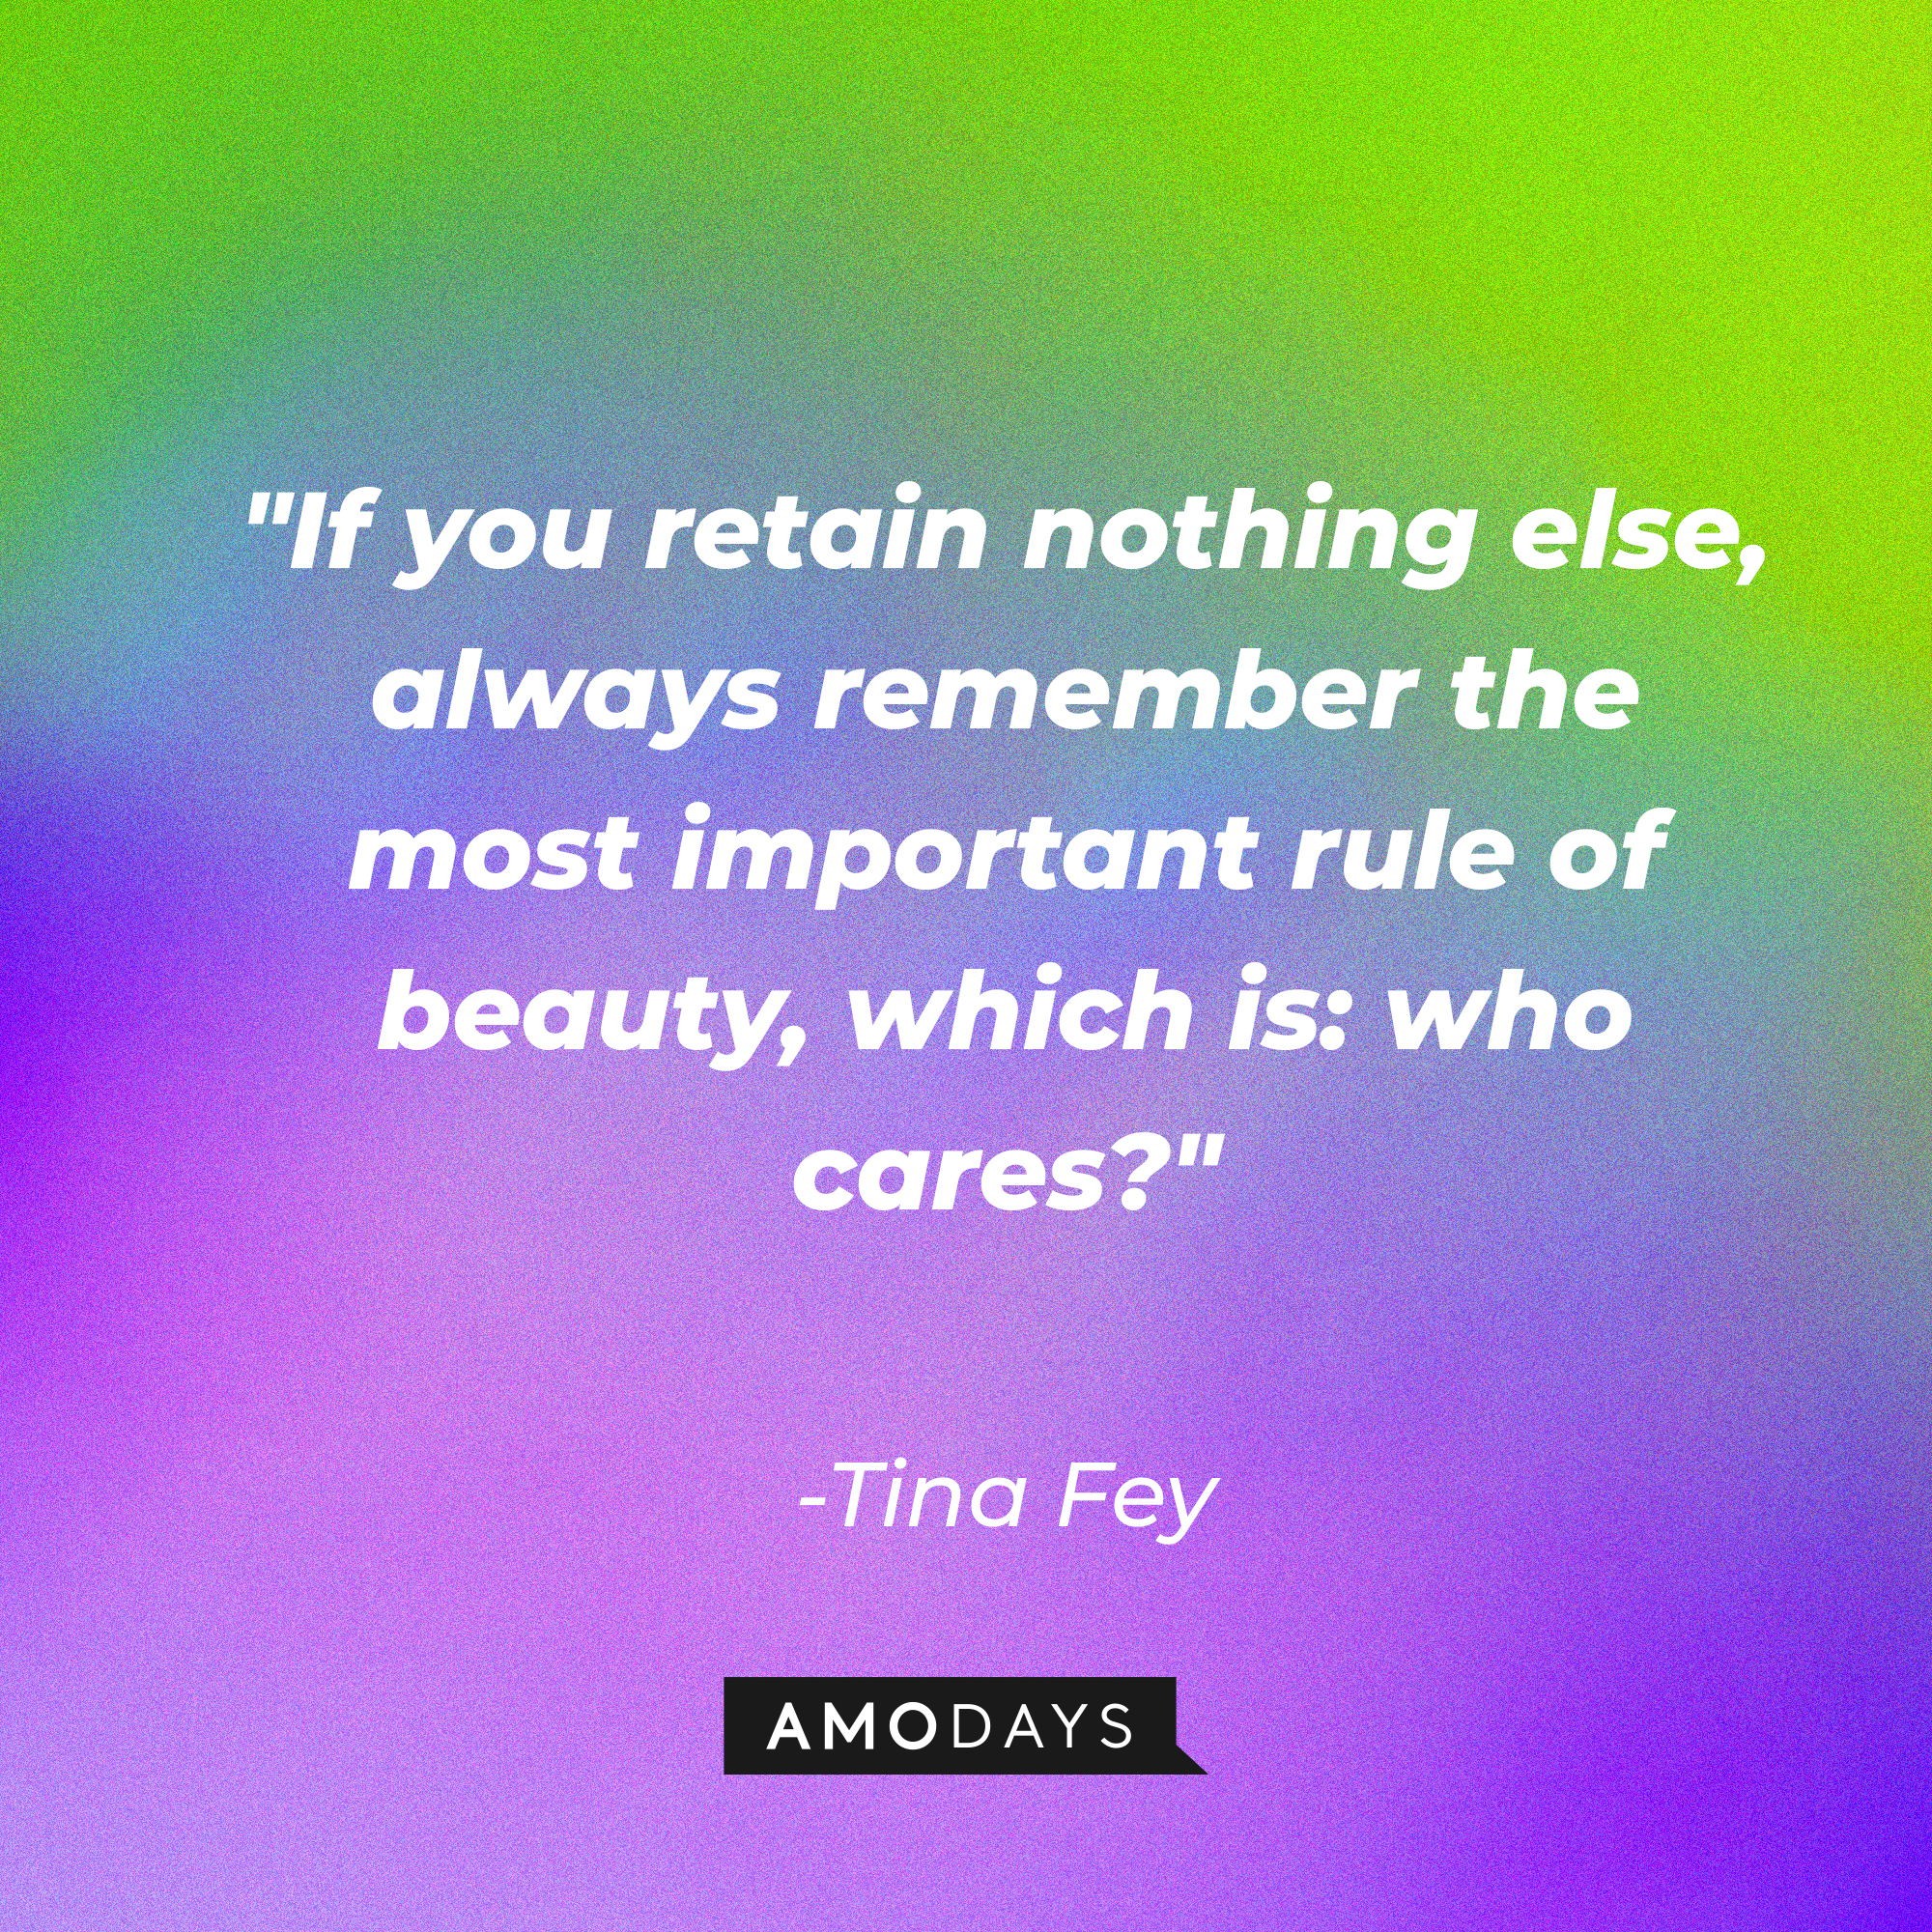 Tina Fey's quote: "If you retain nothing else, always remember the most important rule of beauty, which is: who cares?" | Source: AmoDays